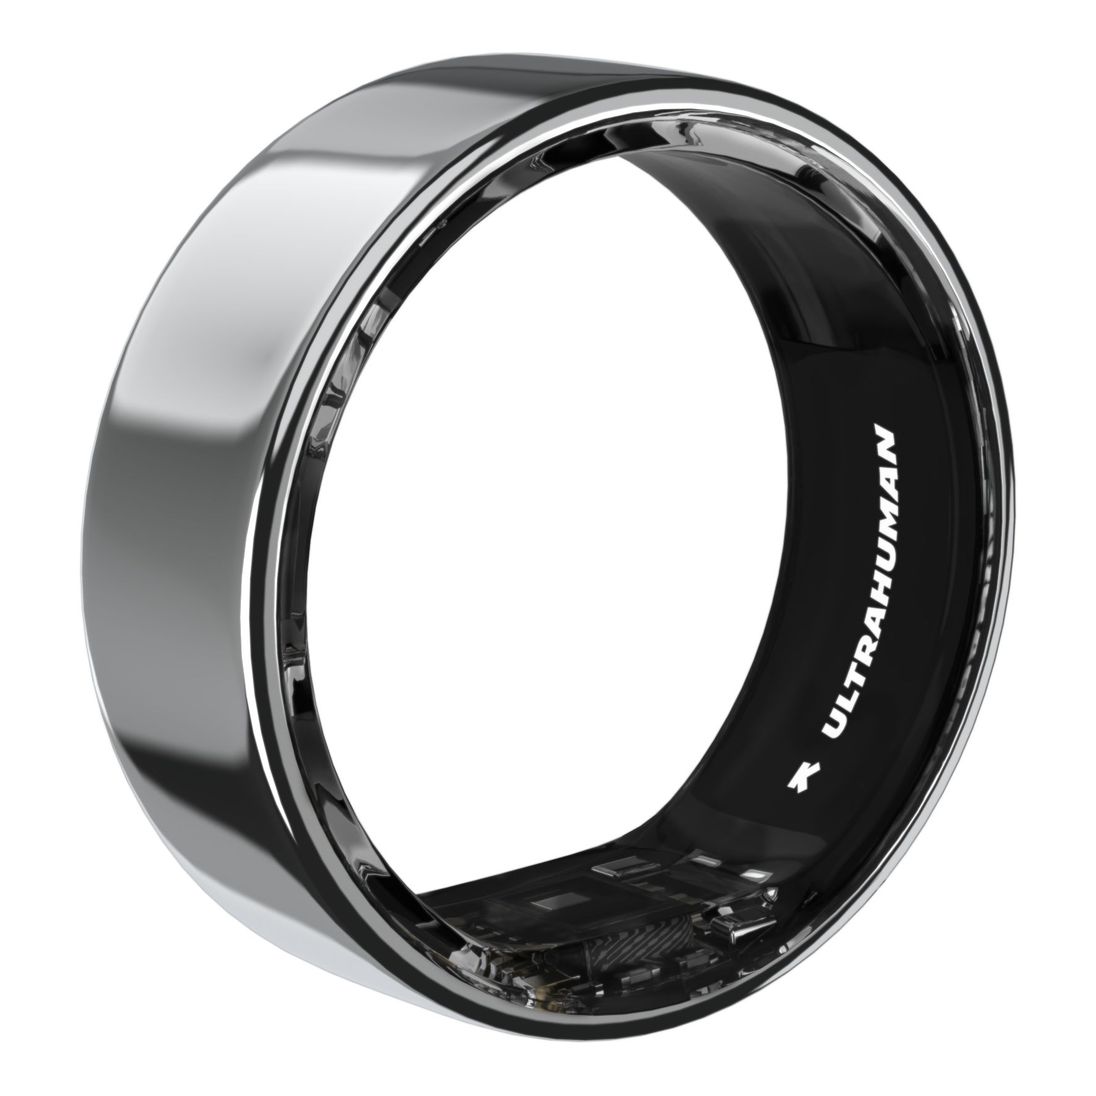 Ultrahuman Ring AIR Smart Ring - Size 13 - Space Silver